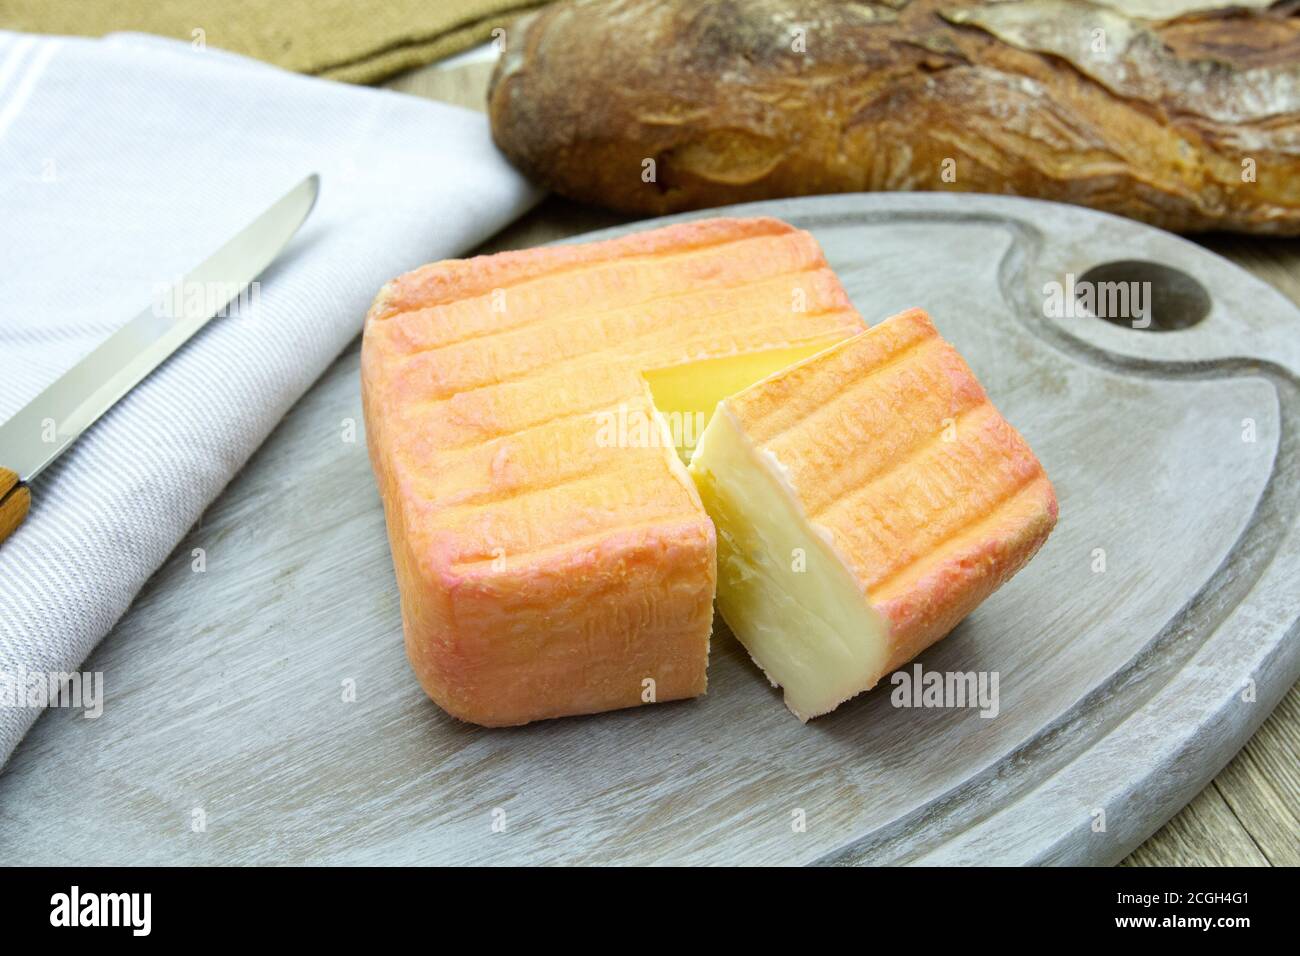 maroilles on a cutting board Stock Photo